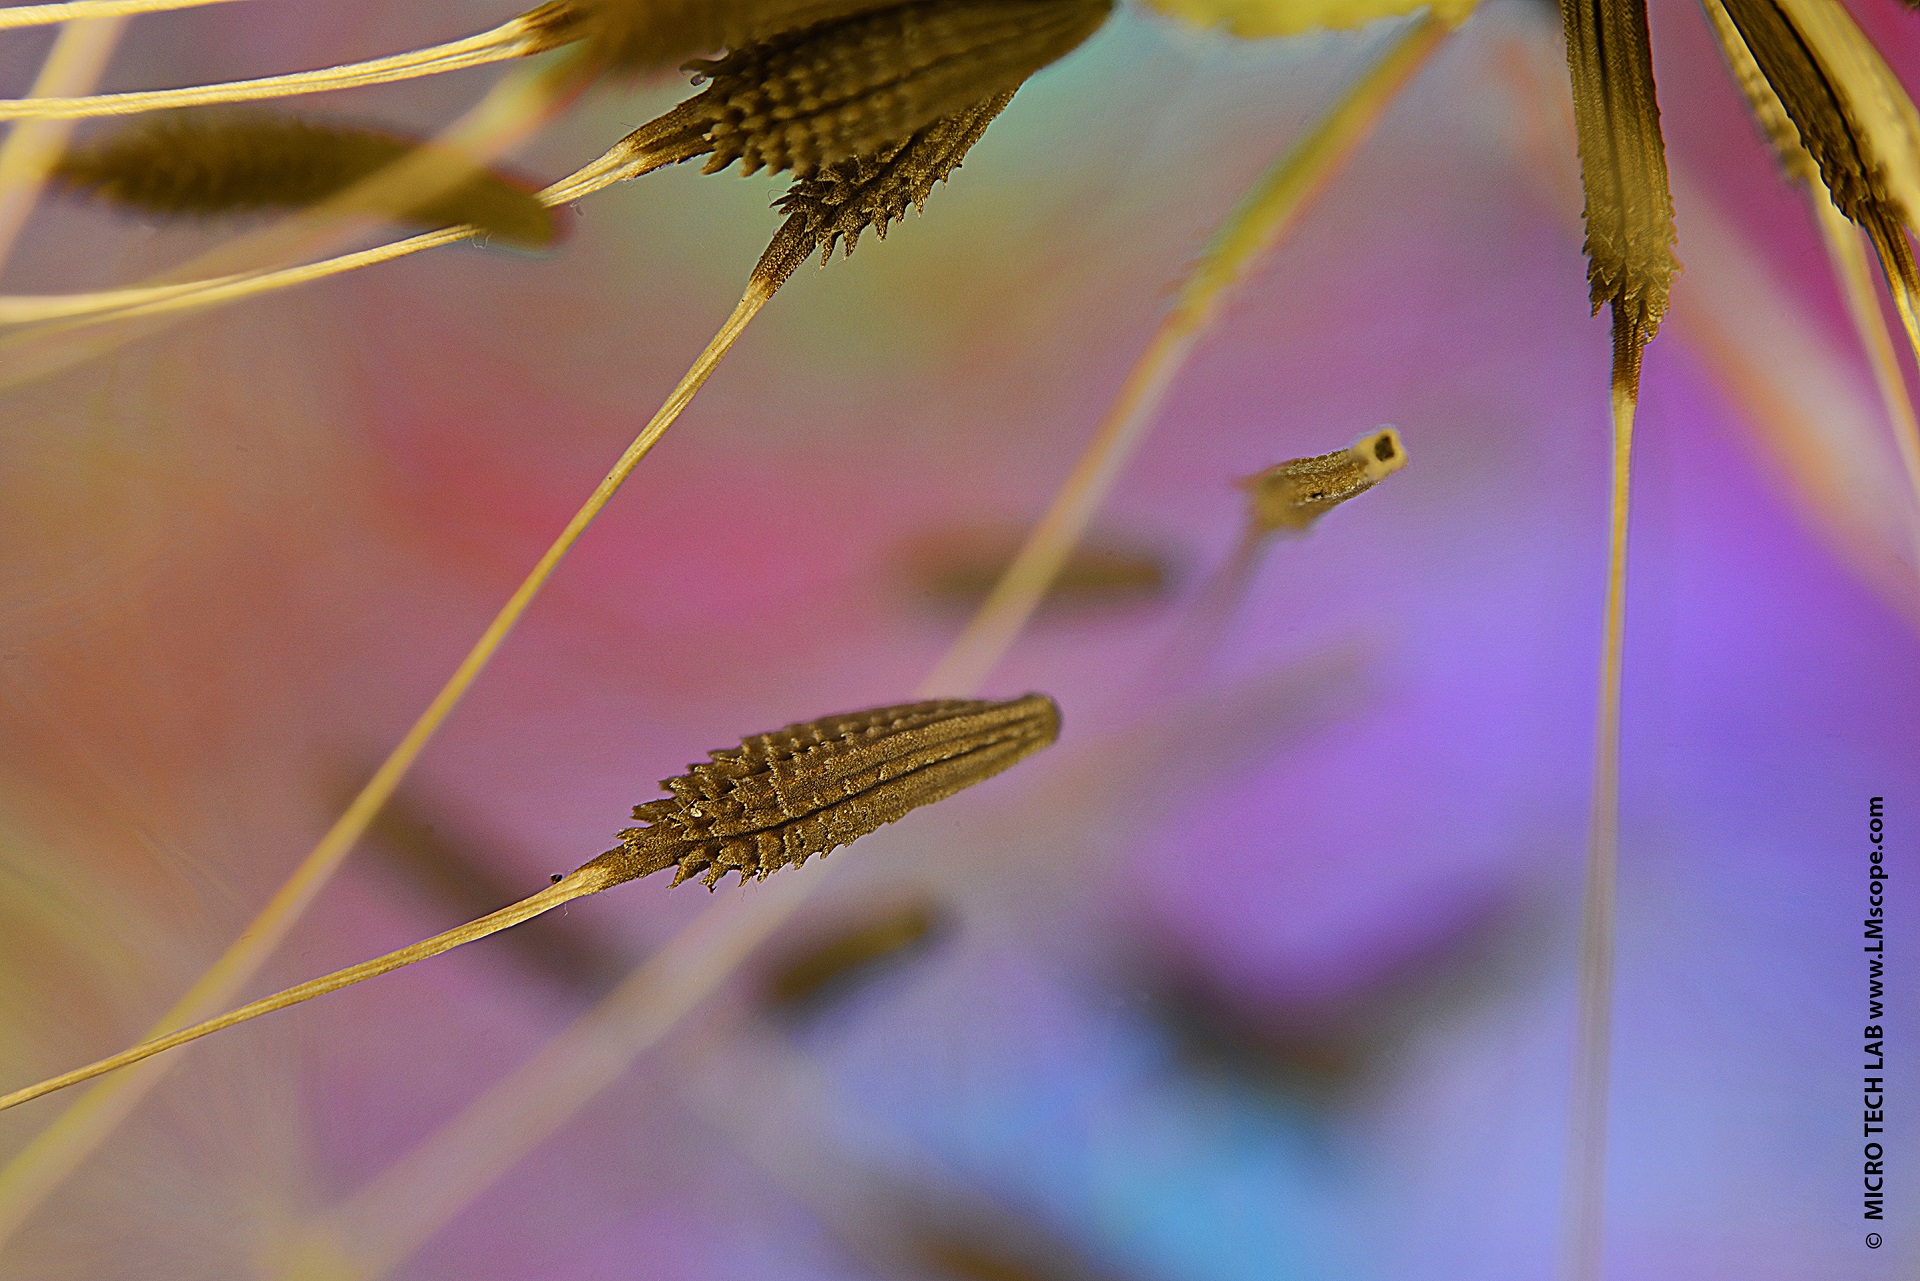 Dandelion seeds under the LM photomicroscope